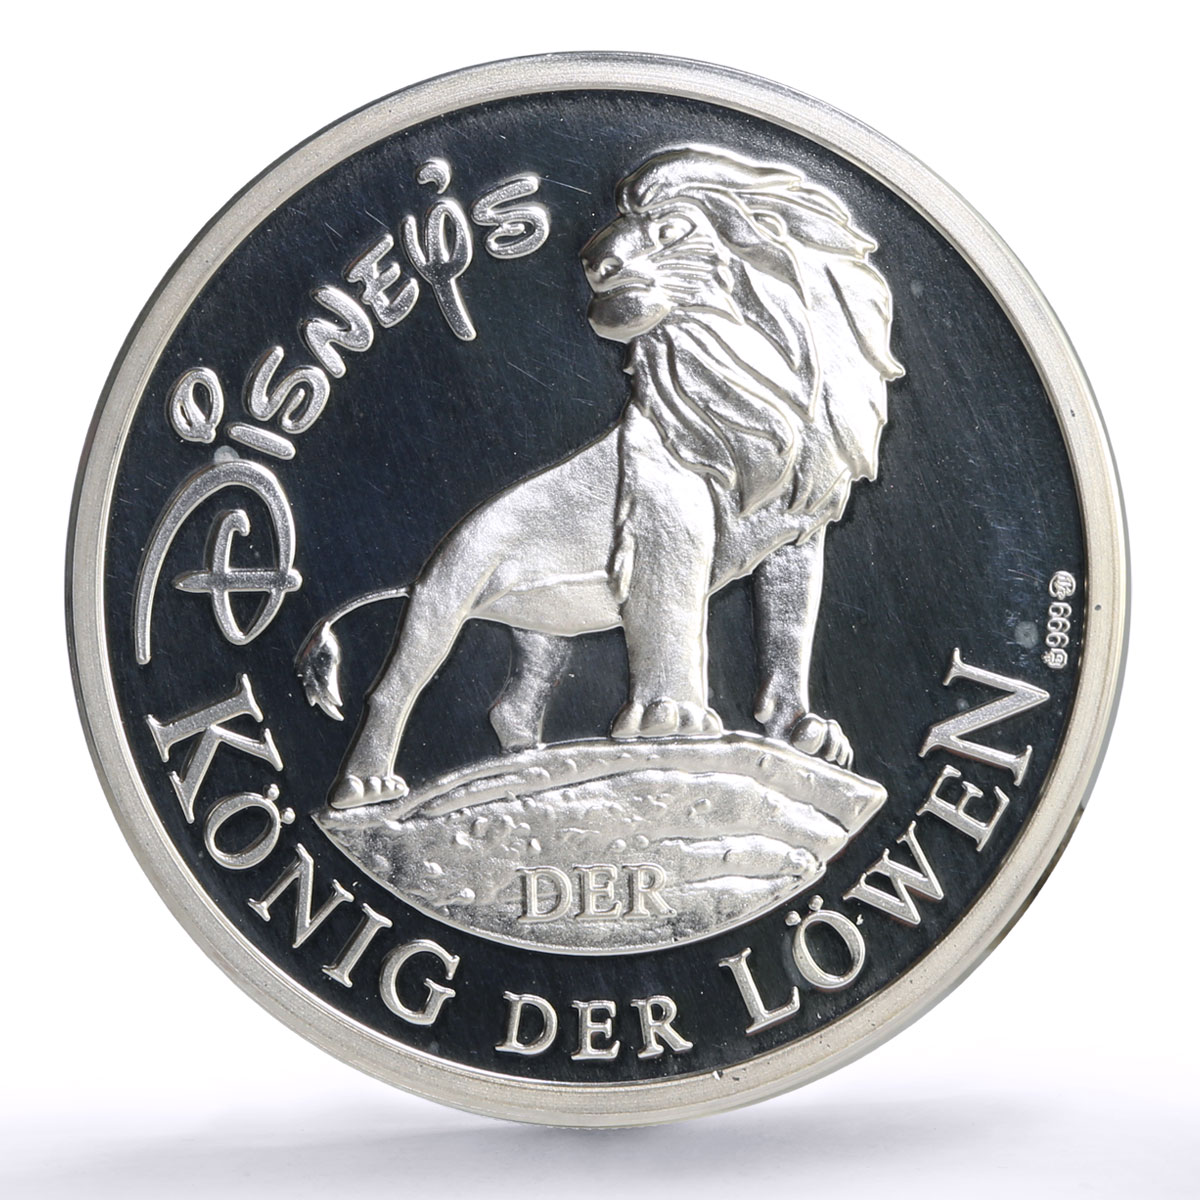 Germany Bayern Mint Disney Cartoons Lion King proof silver token medal coin 1995